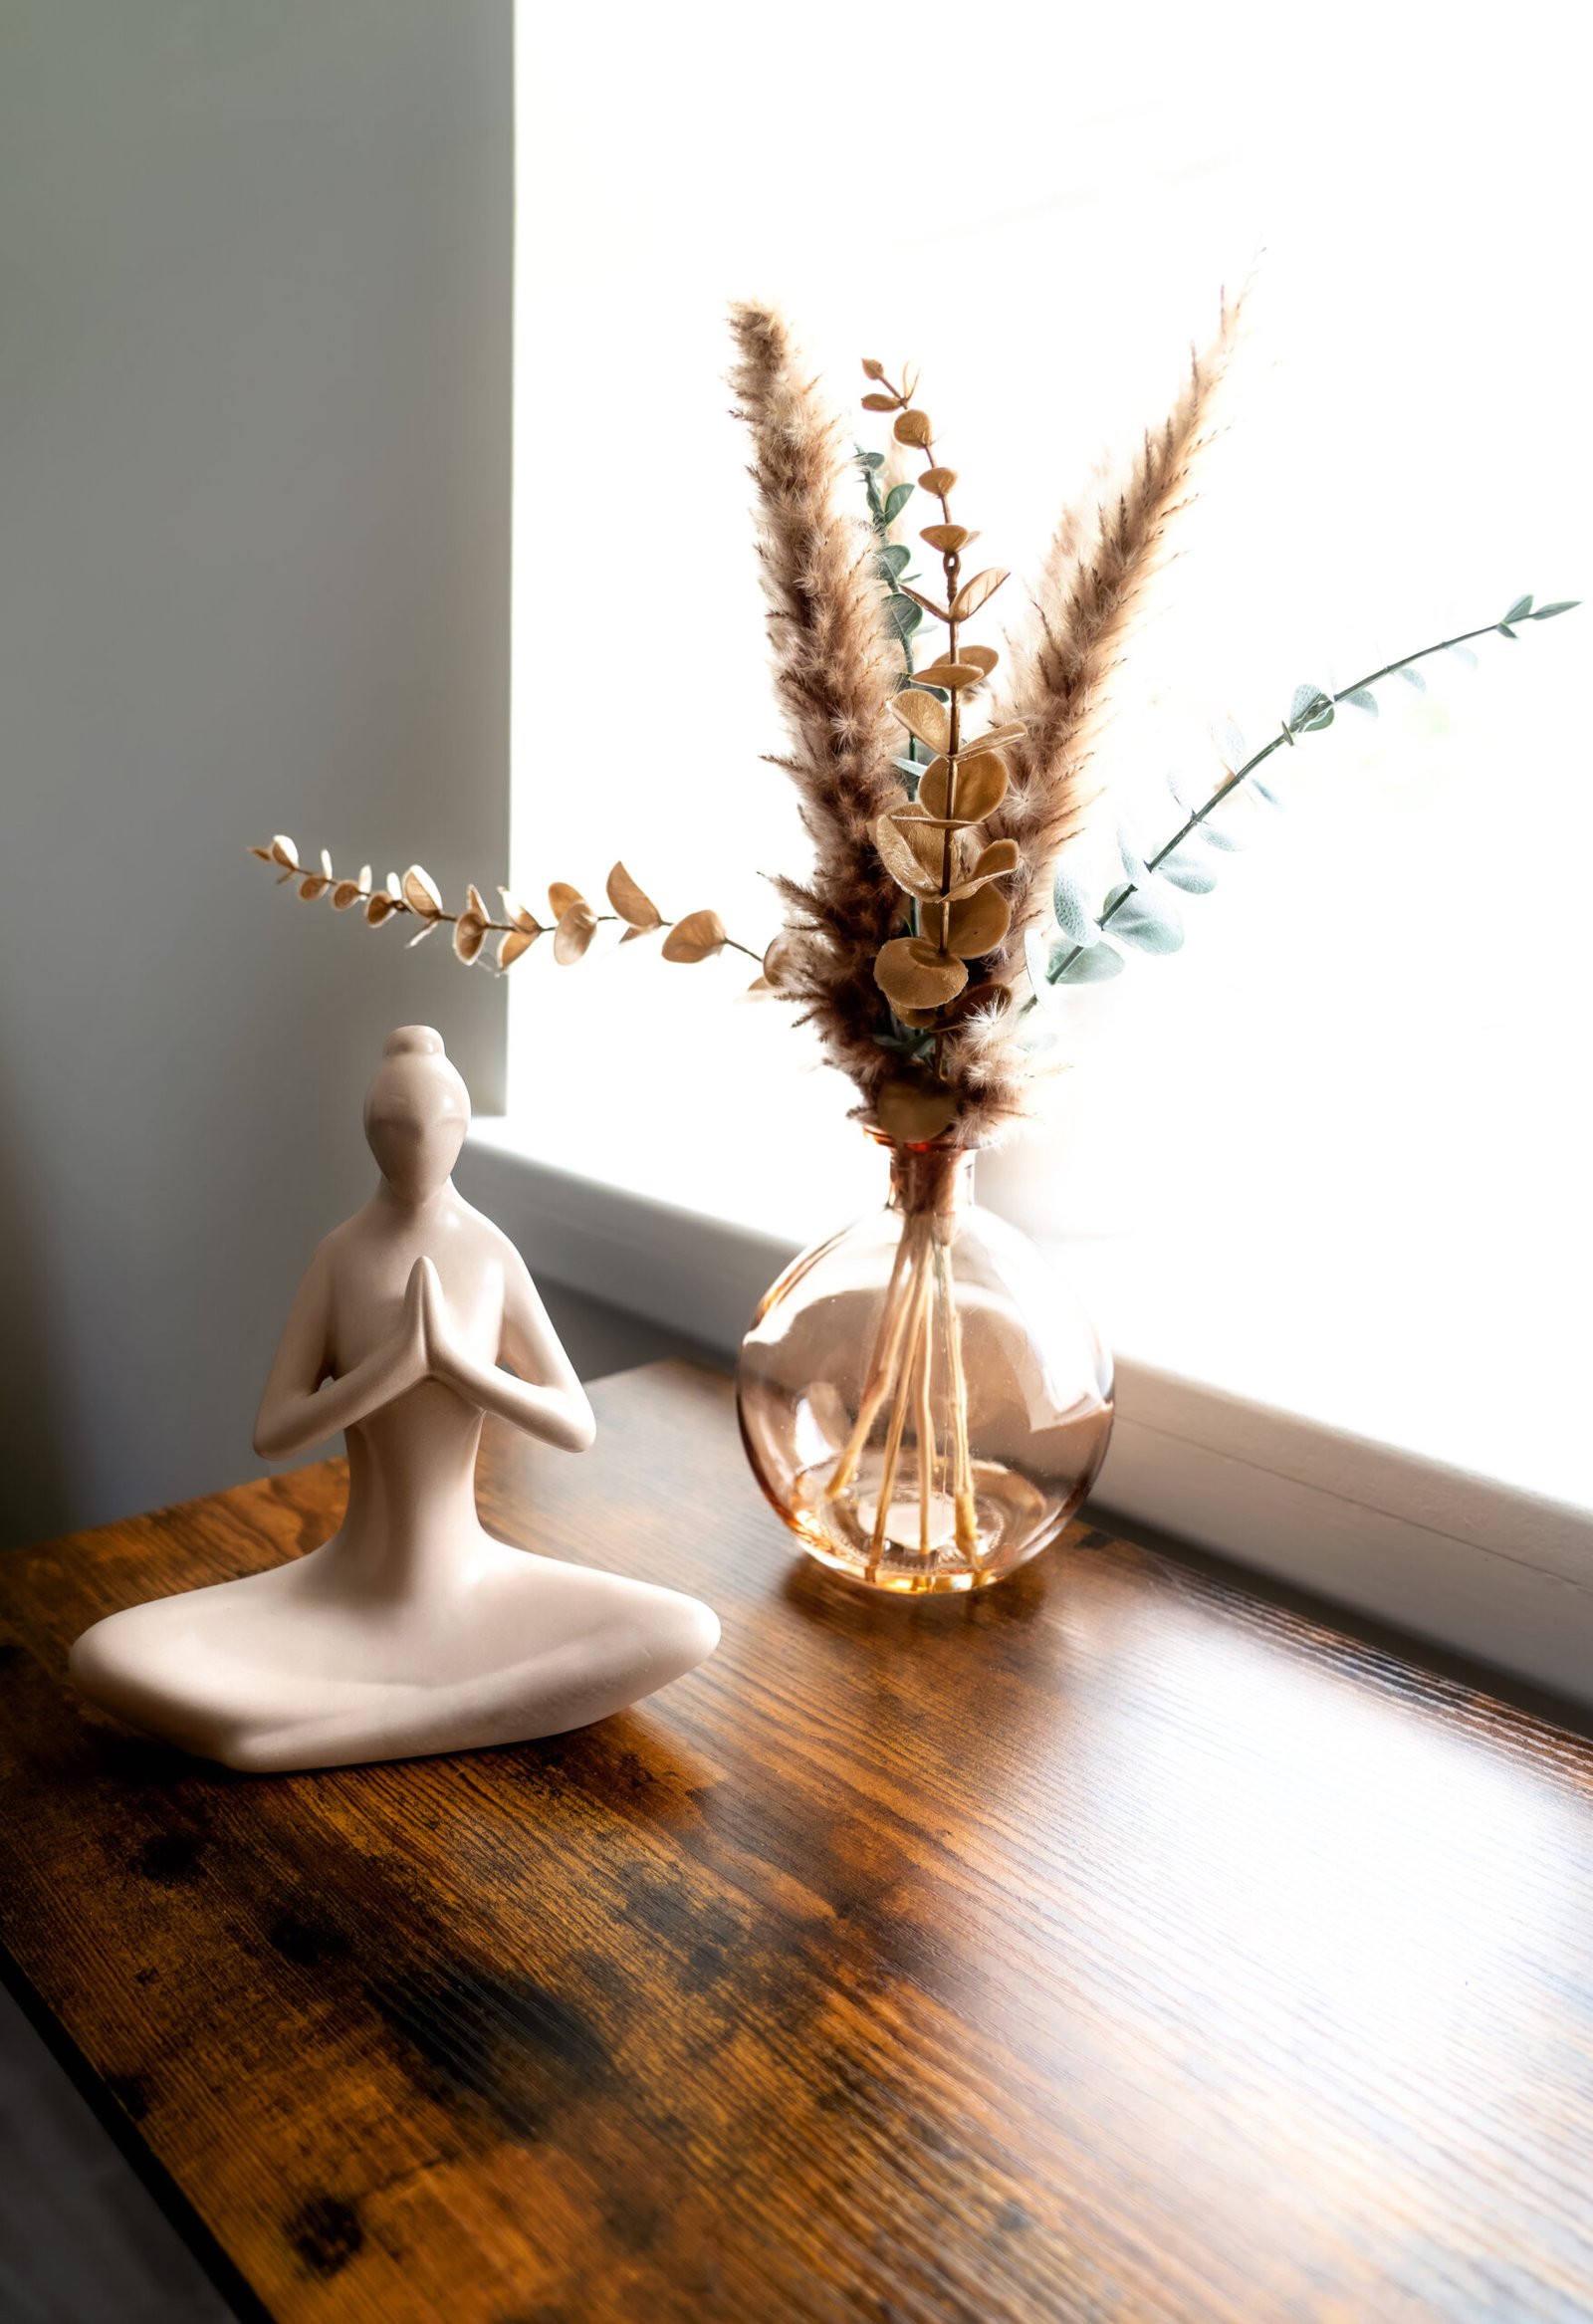 Serene yoga figurine and vase with dried flowers on a wooden table, symbolizing peace and mindfulness.